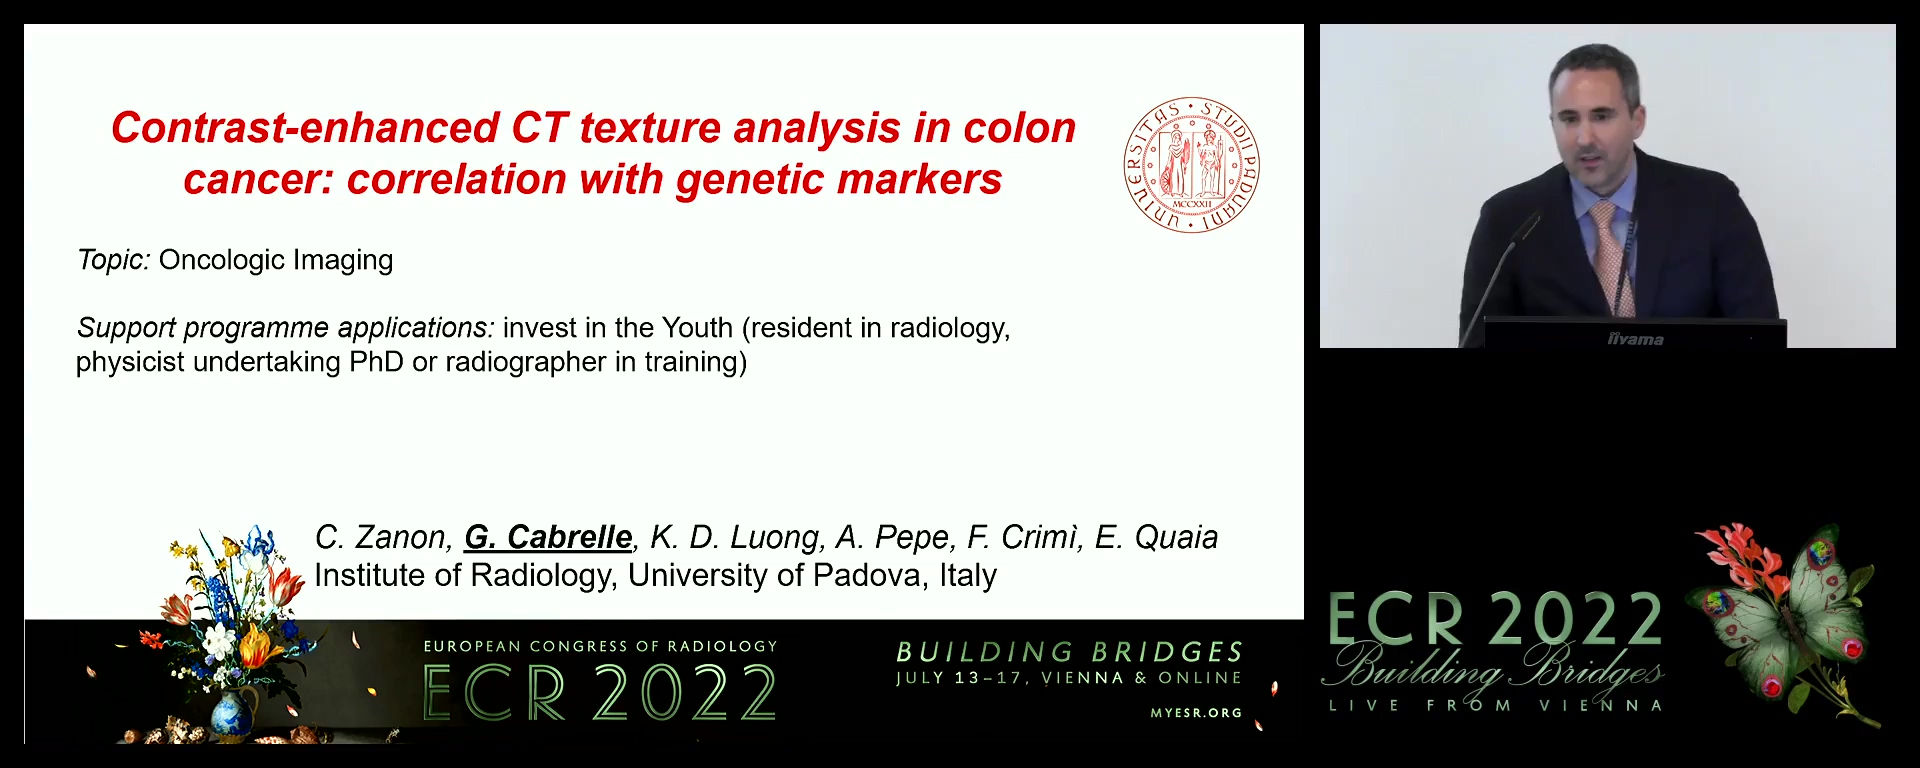 Contrast-enhanced computed tomography texture analysis in colon cancer: correlation with genetic markers - Giulio Cabrelle, Padua / IT